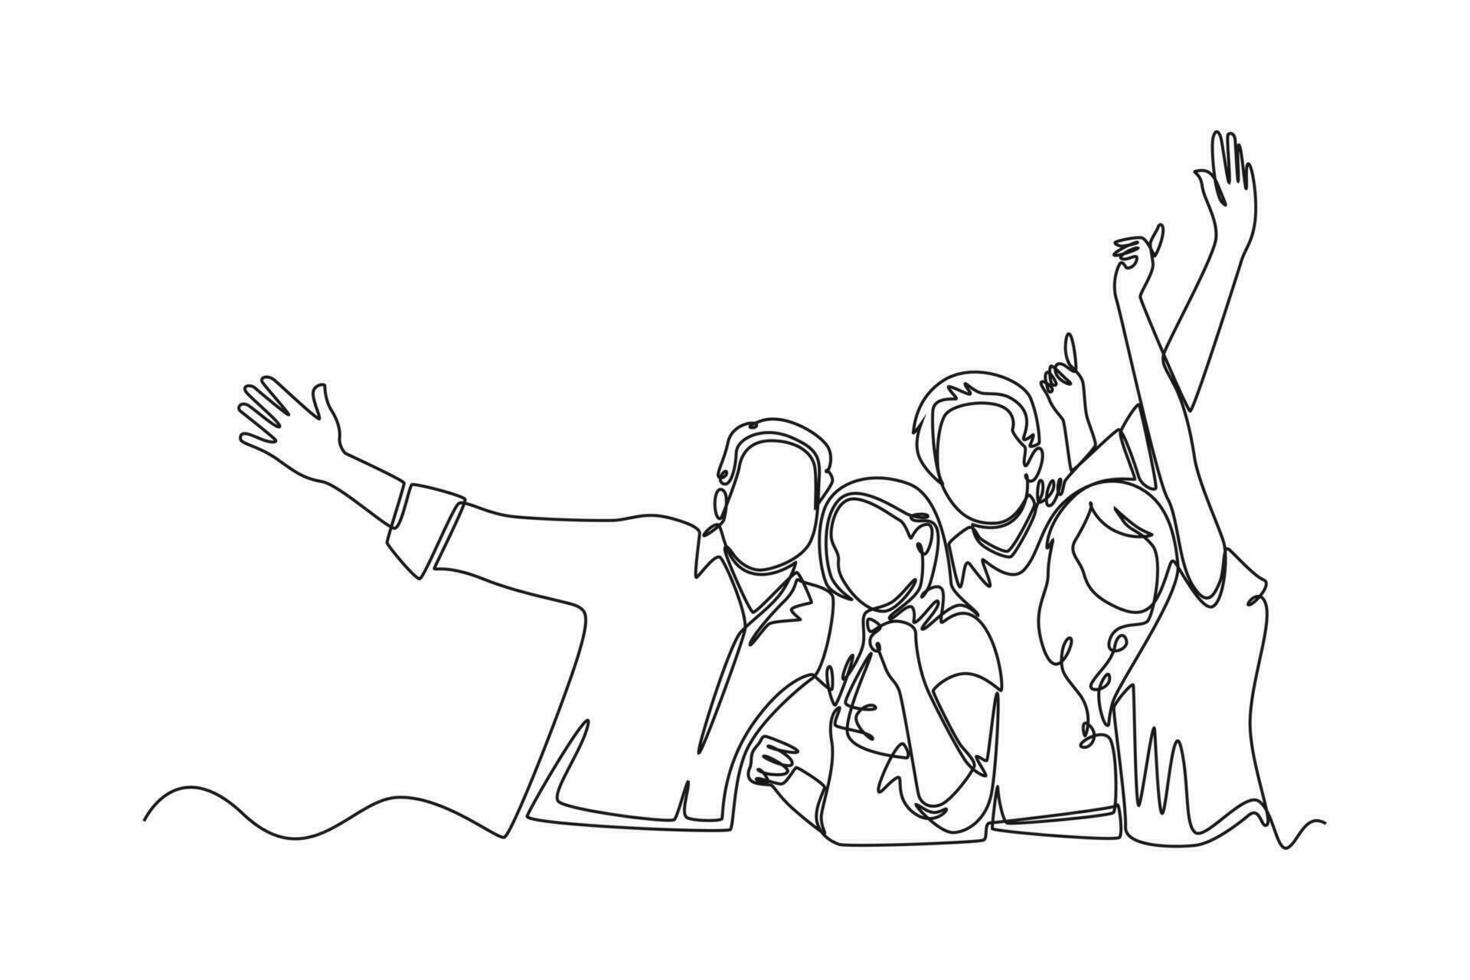 Continuous one line drawing of happy people group, welcoming and applauding concept. Doodle vector illustration in simple linear style.